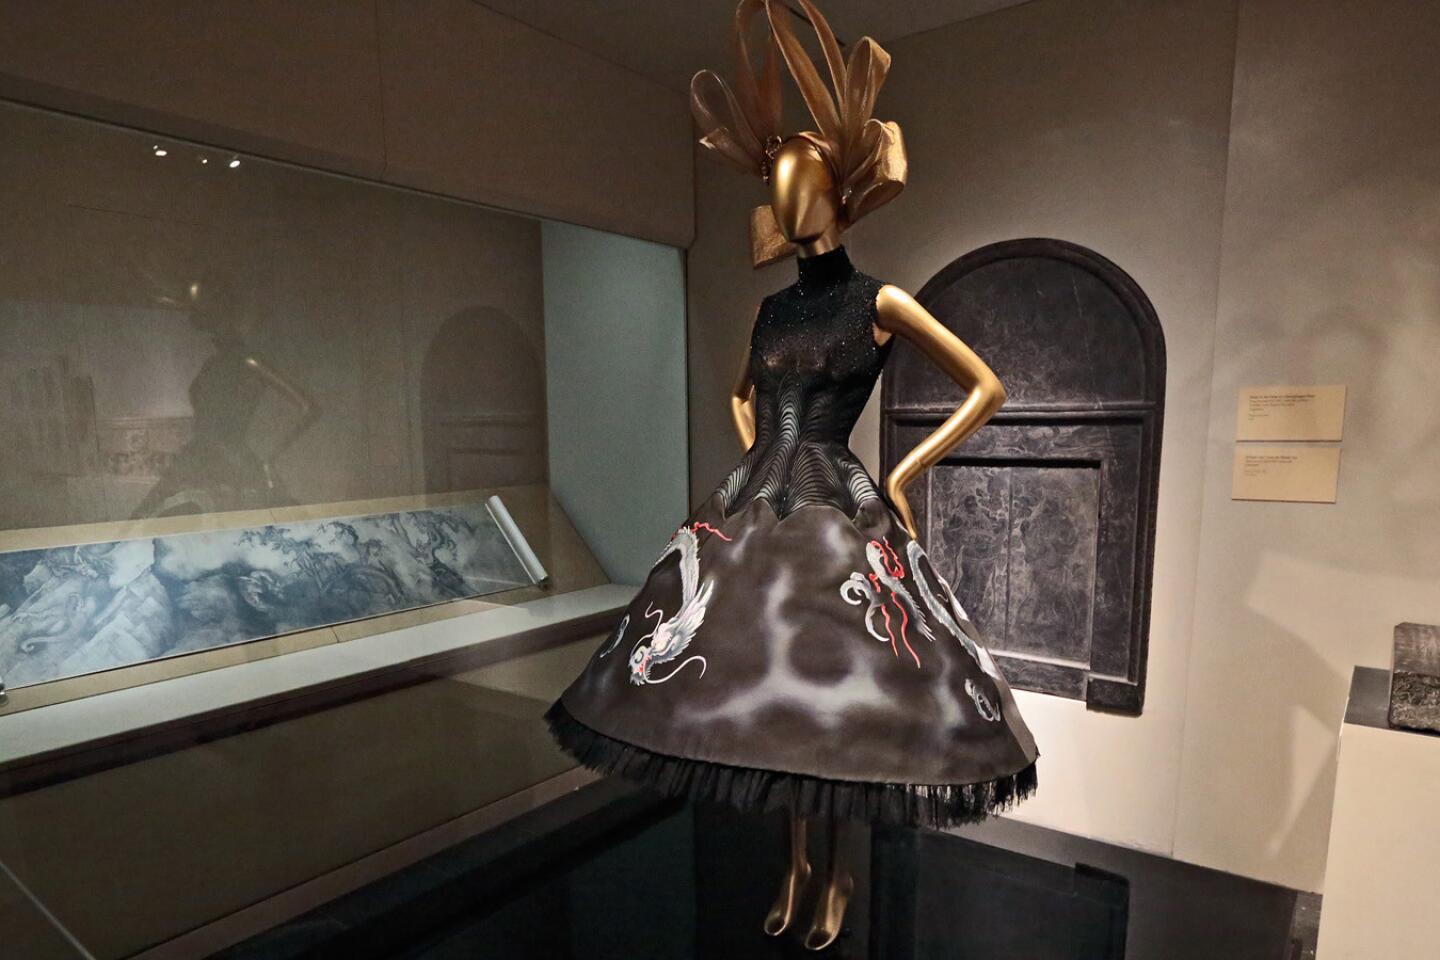 Second Chinese Edition of 'Art 'N Dior' Exhibition Heads to